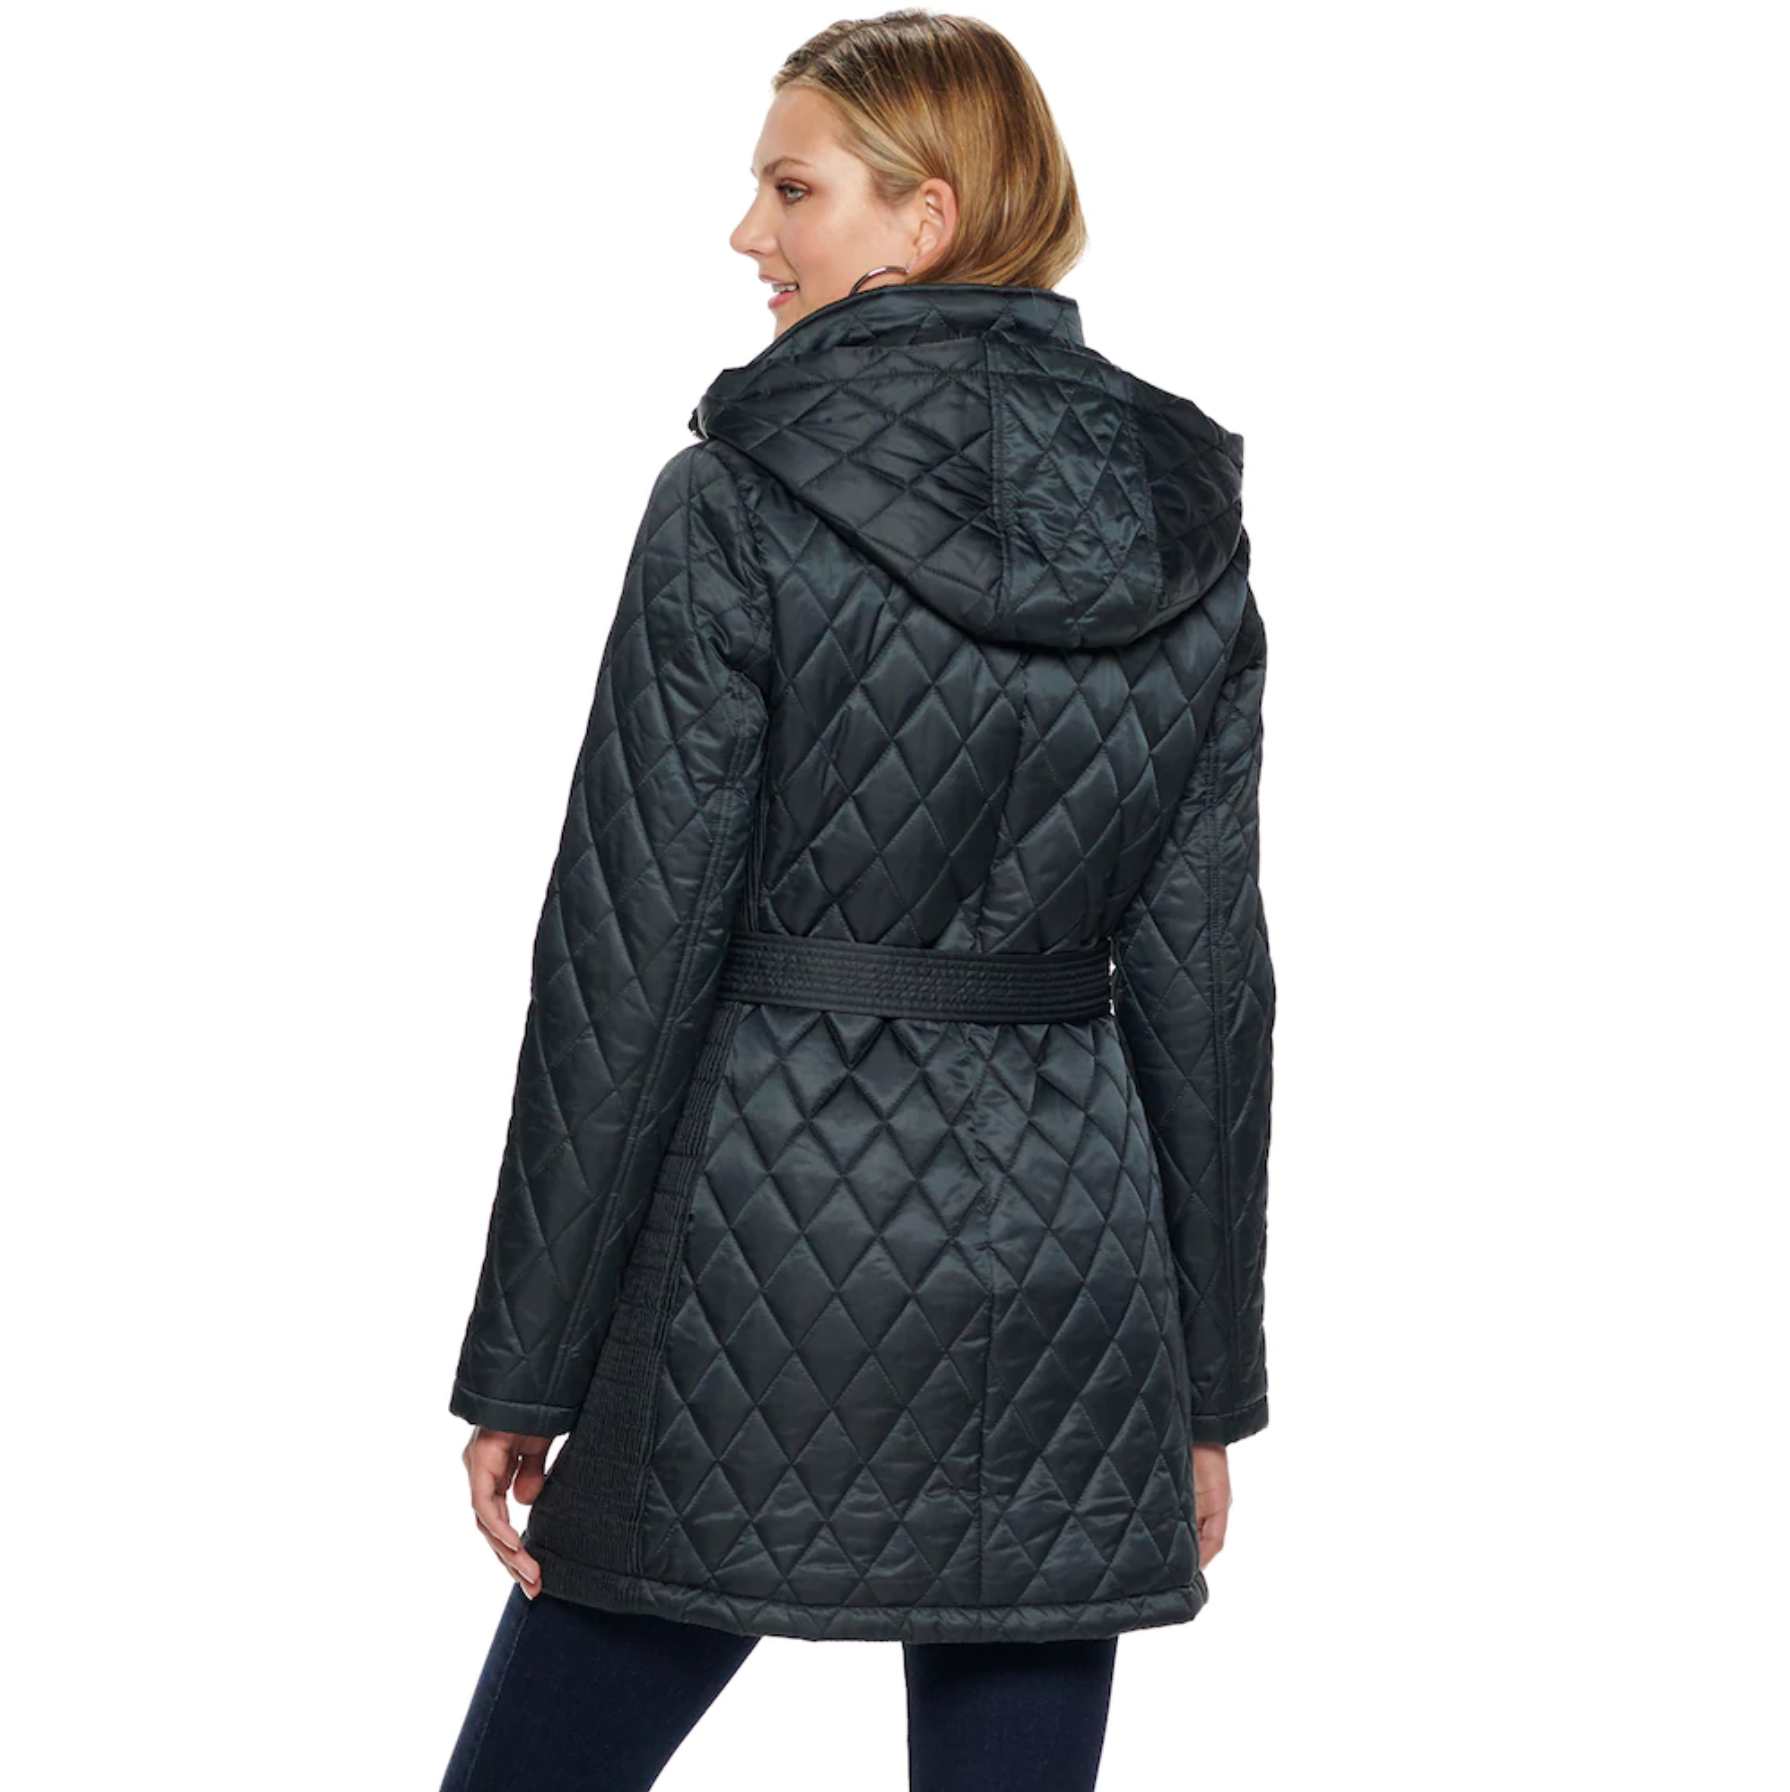 Nine West + Hooded Diamond-Quilted Belted Jacket